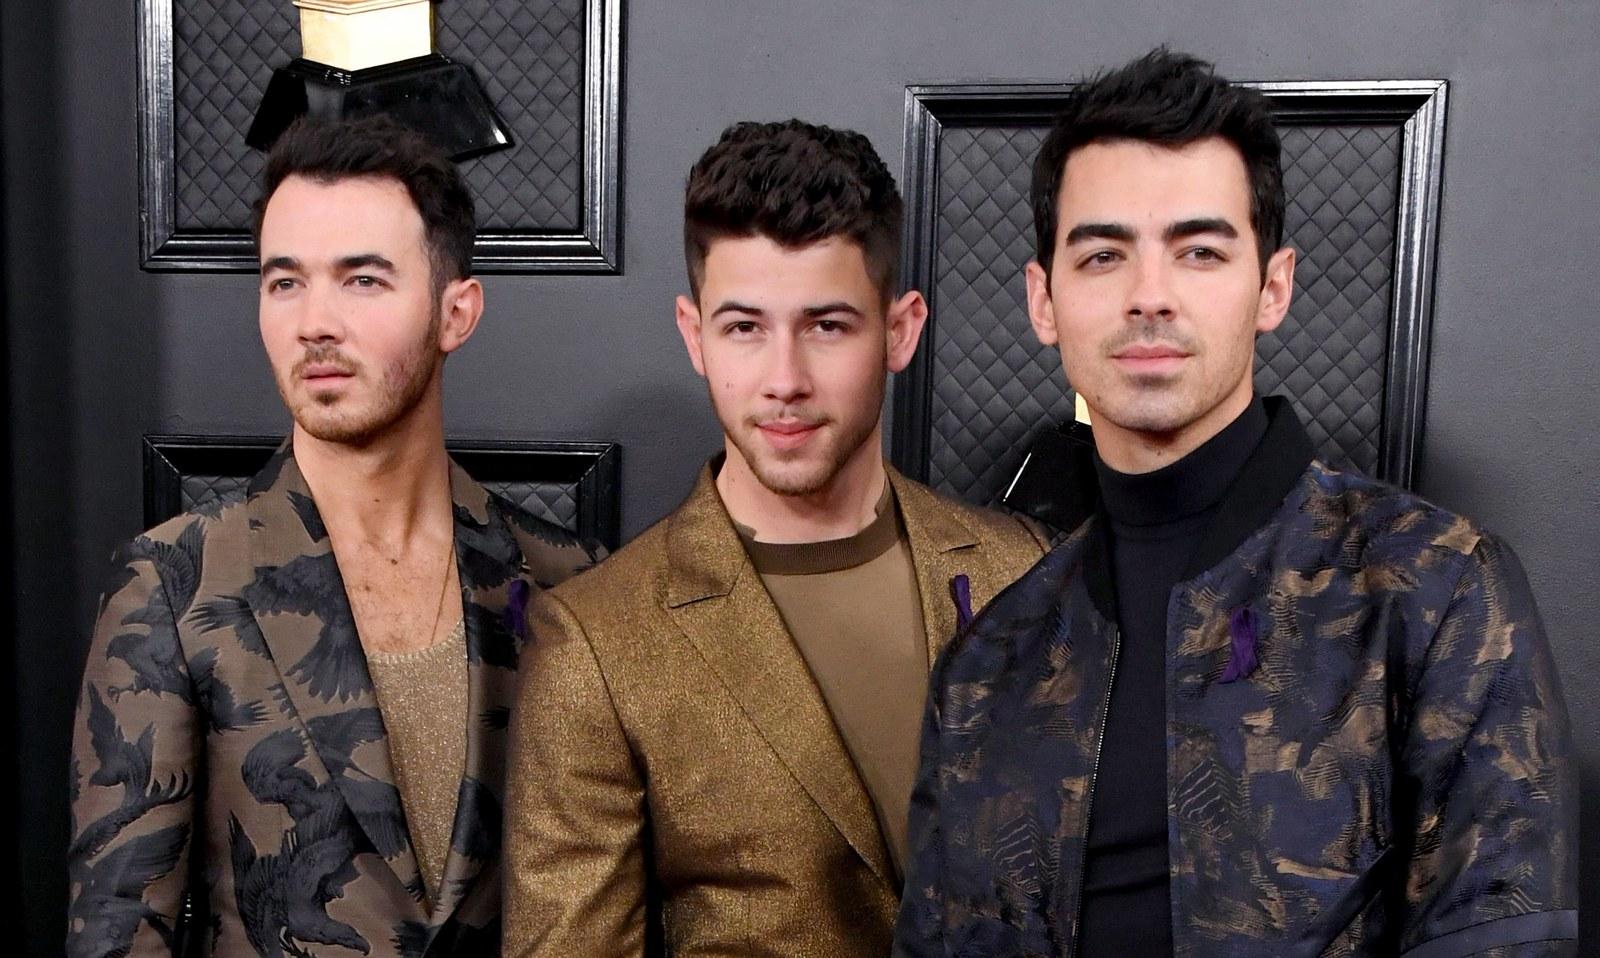 The Jonas Brothers Were Cool and Coordinated at the Grammys